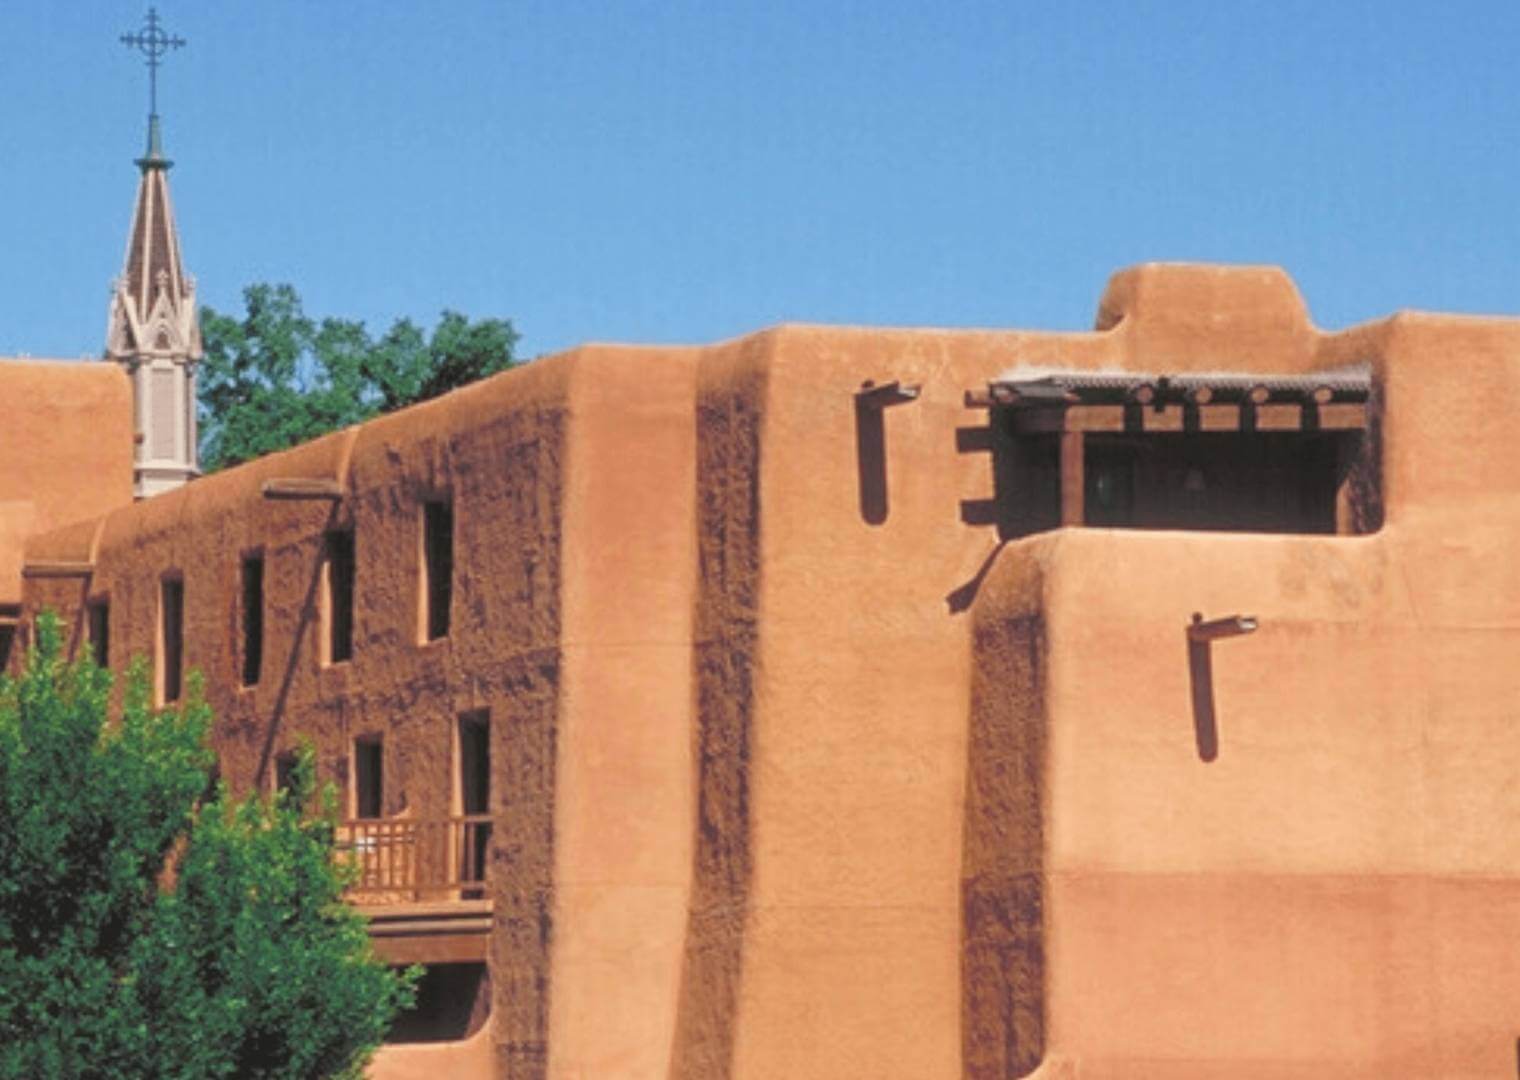 Spanish colonizers discovered Pueblo tribes in the Rio Grande Valley in the 16th century. When constructing homes and community buildings, they combined some of the Pueblo’s building designs and materials with their own techniques.